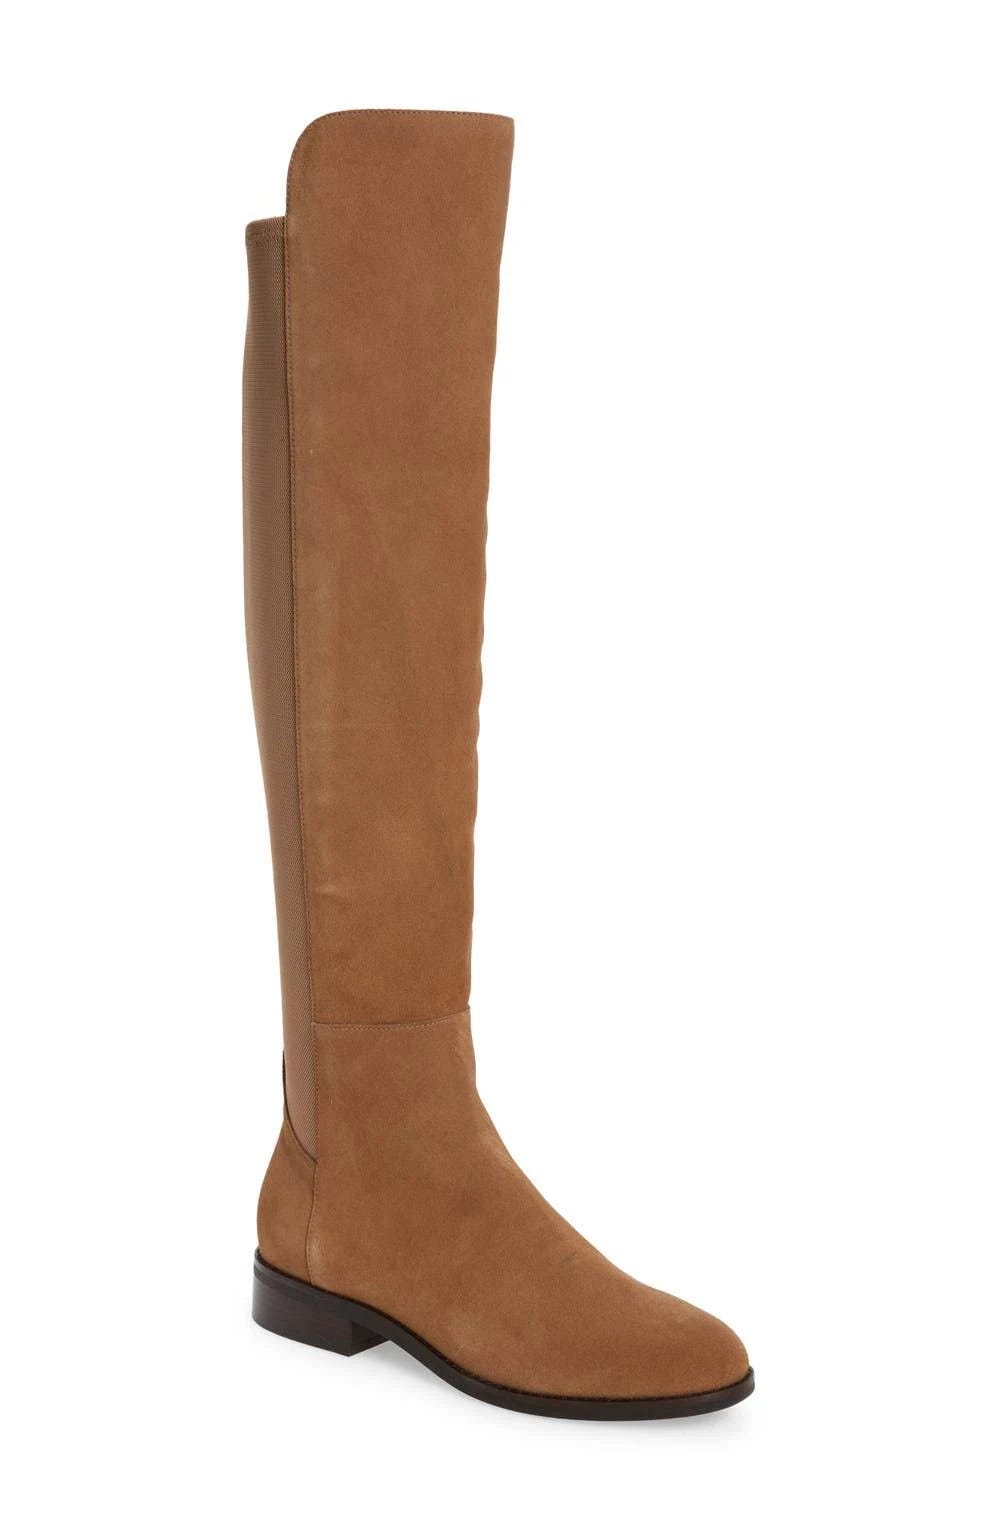 Elegant Salted Caramel Suede Thigh High Boots | Image